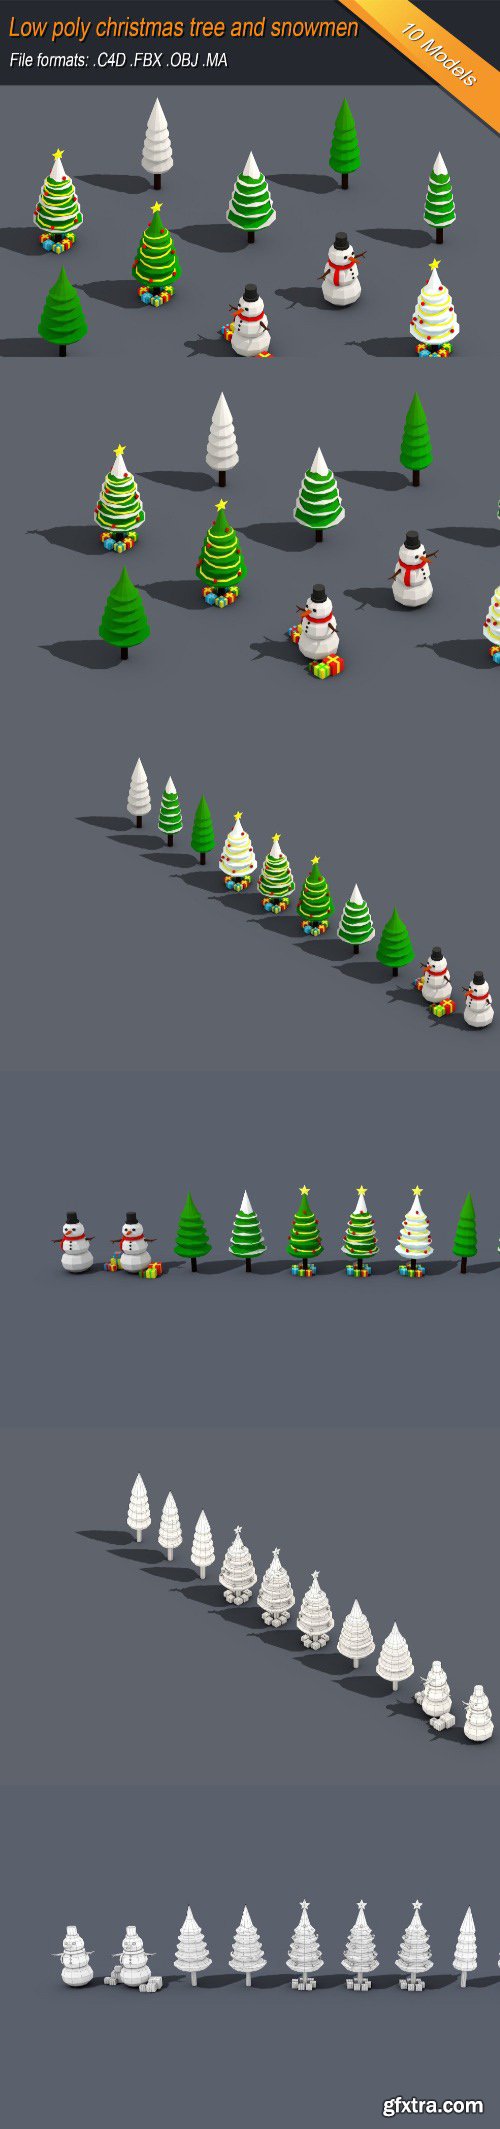 Cgtrader - Low Poly Christmas Tree And Snowmen Gift Isometric Low-poly 3D model